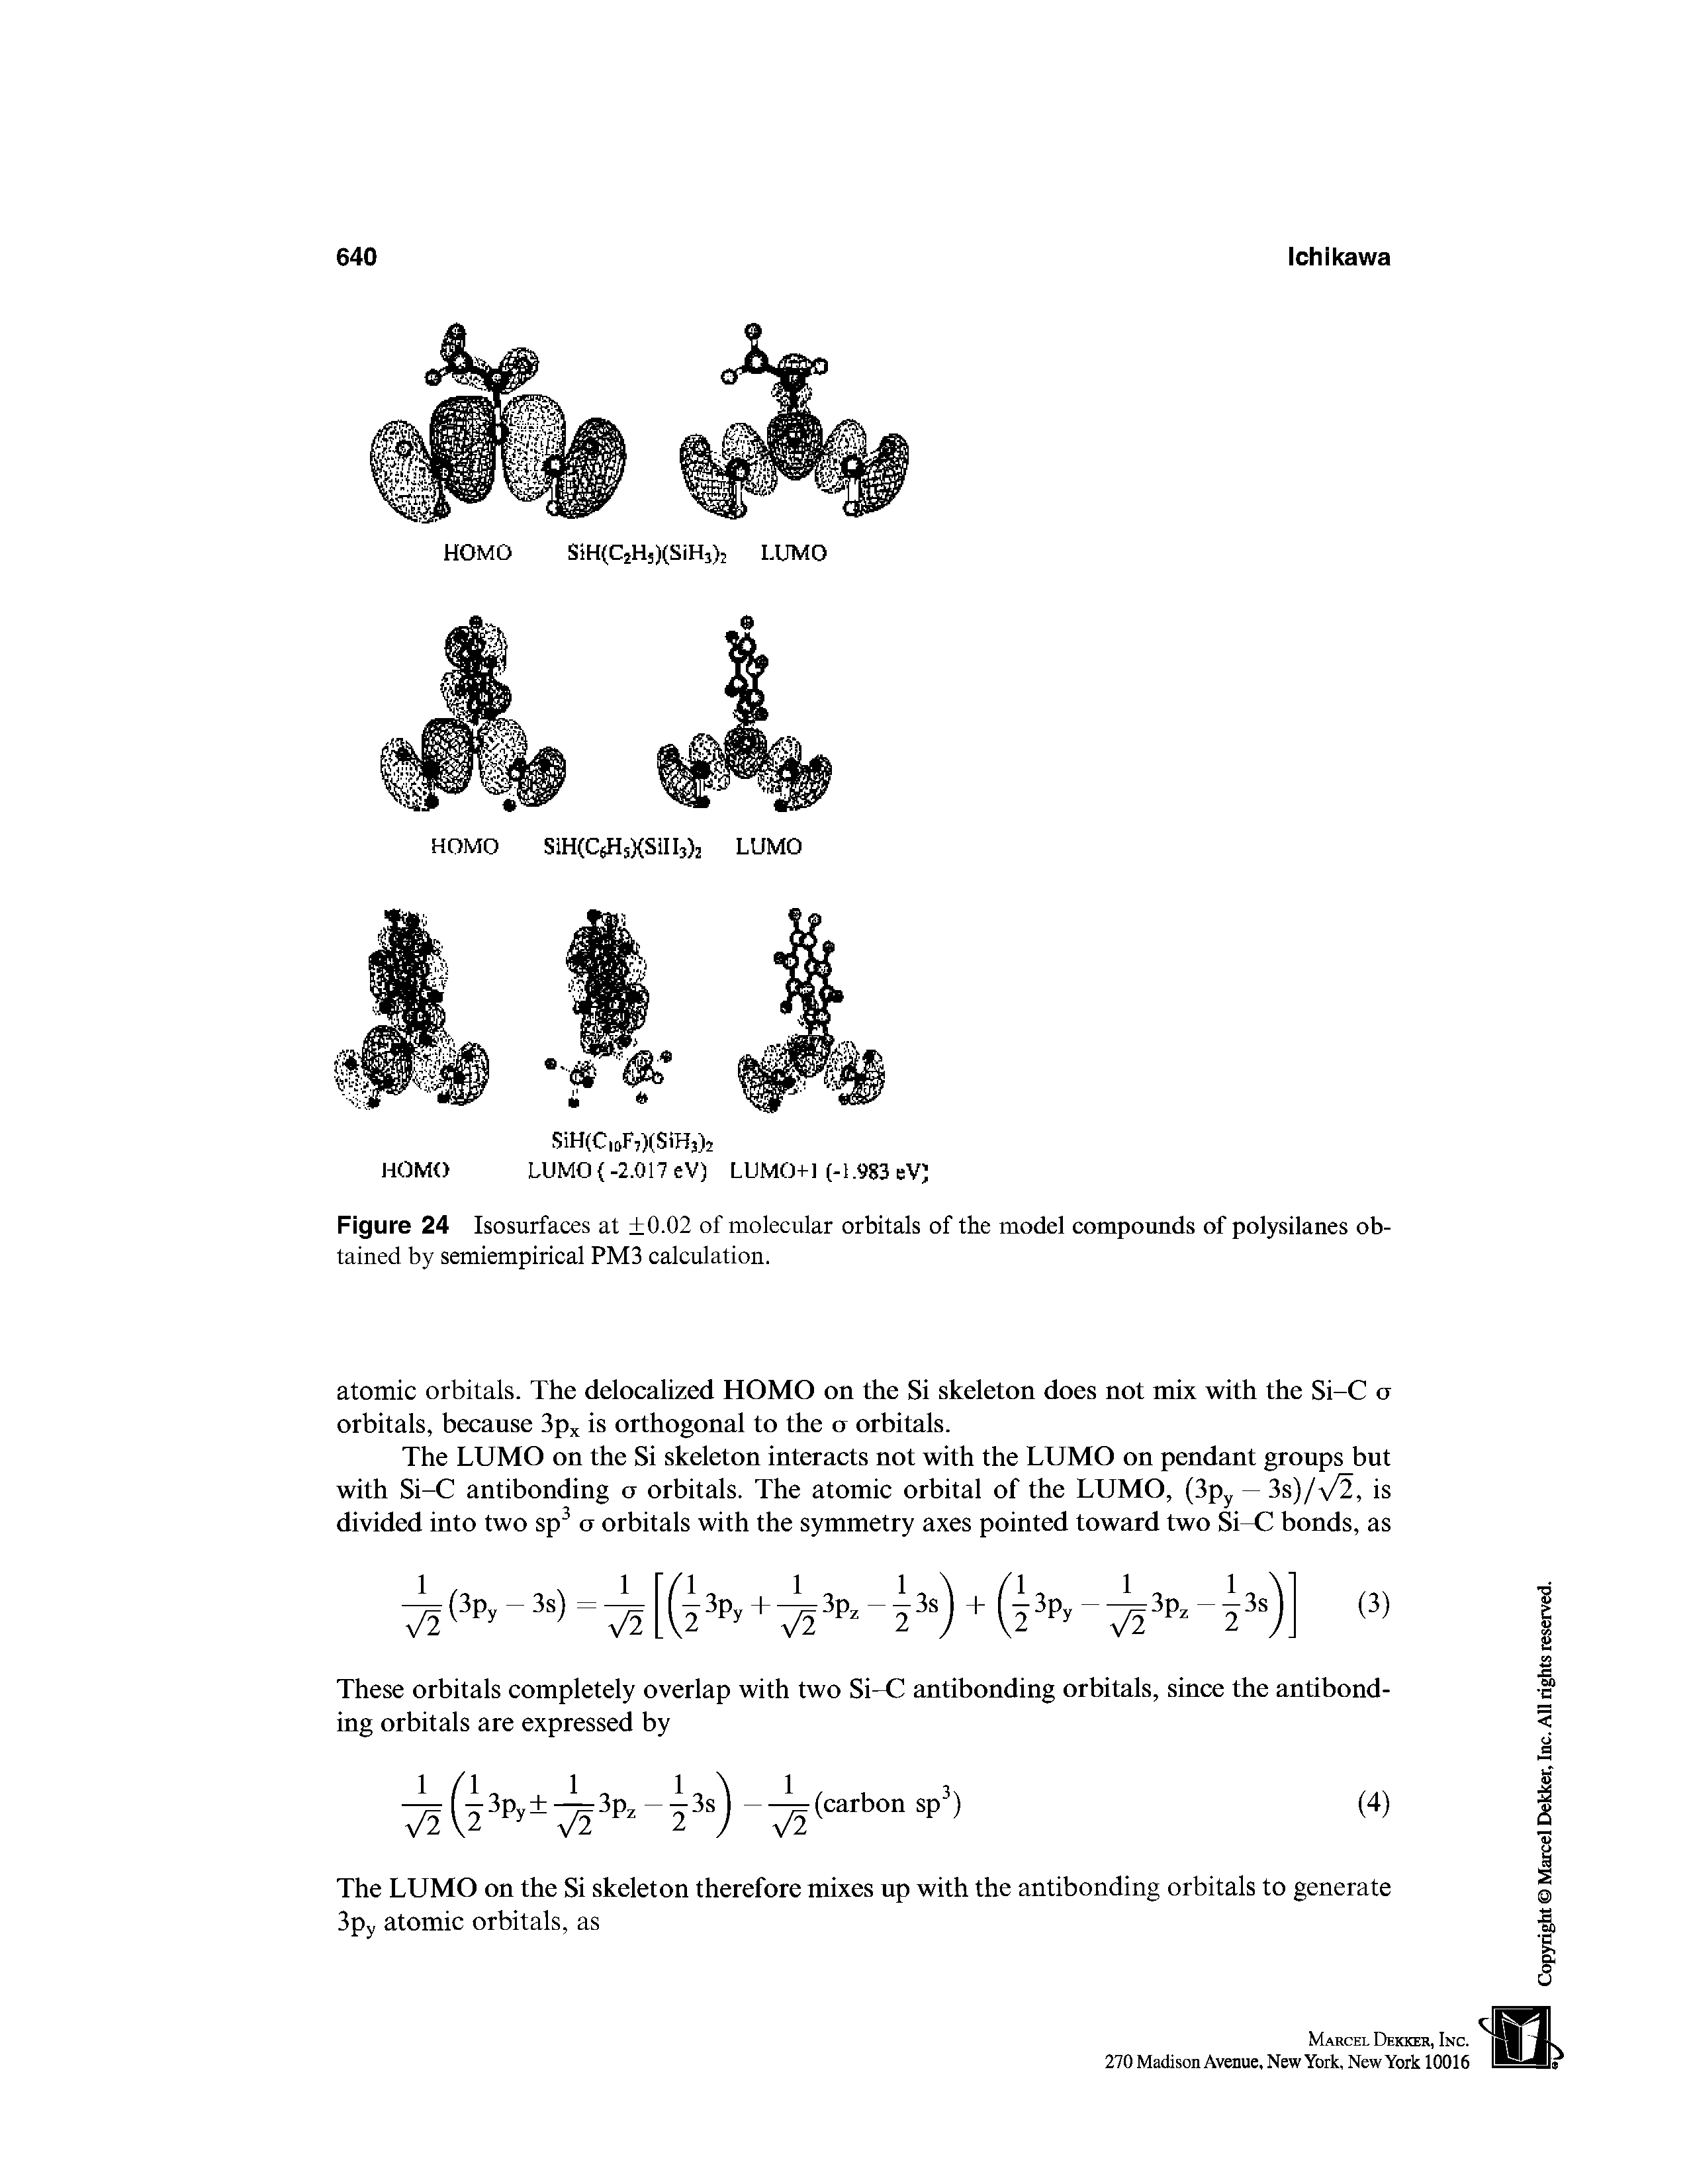 Figure 24 Isosurfaces at +0.02 of molecular orbitals of the model compounds of polysilanes obtained by semiempirical PM3 calculation.